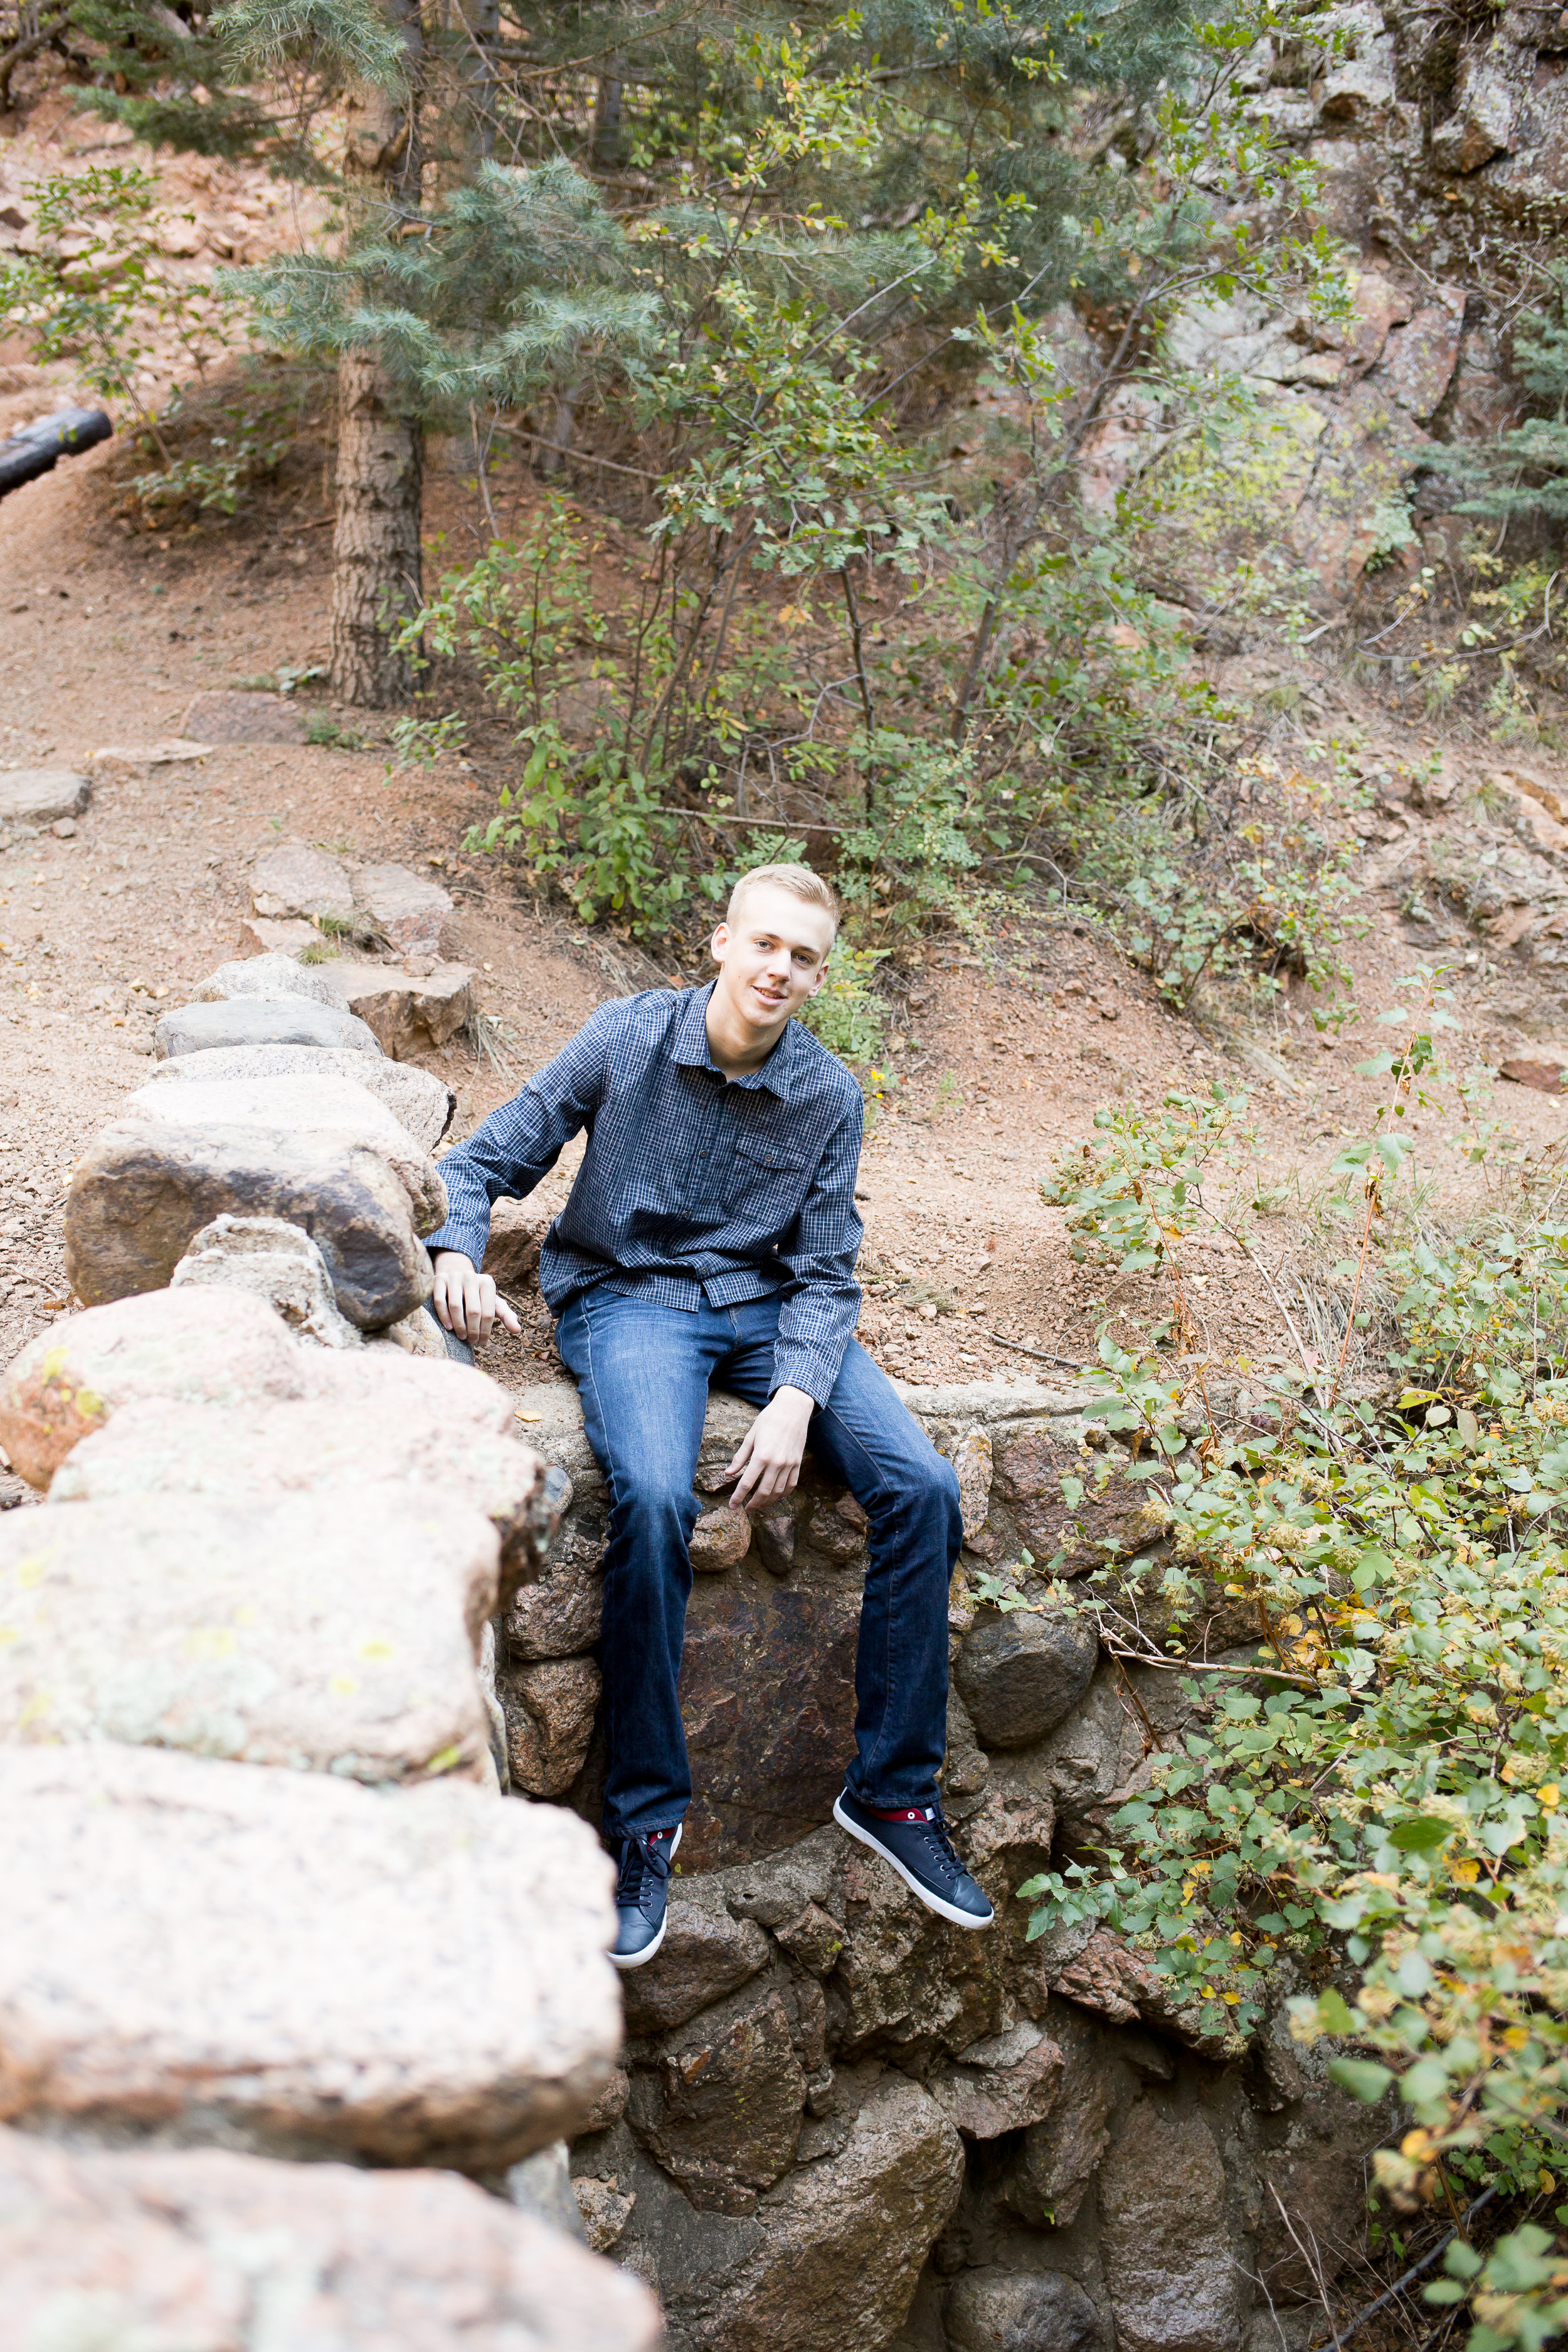 Colorado Springs Senior Photography | Widefield High School senior session in Cheyenne Canyon | Stacy Carosa Photography | Colorado Springs Senior Photographer